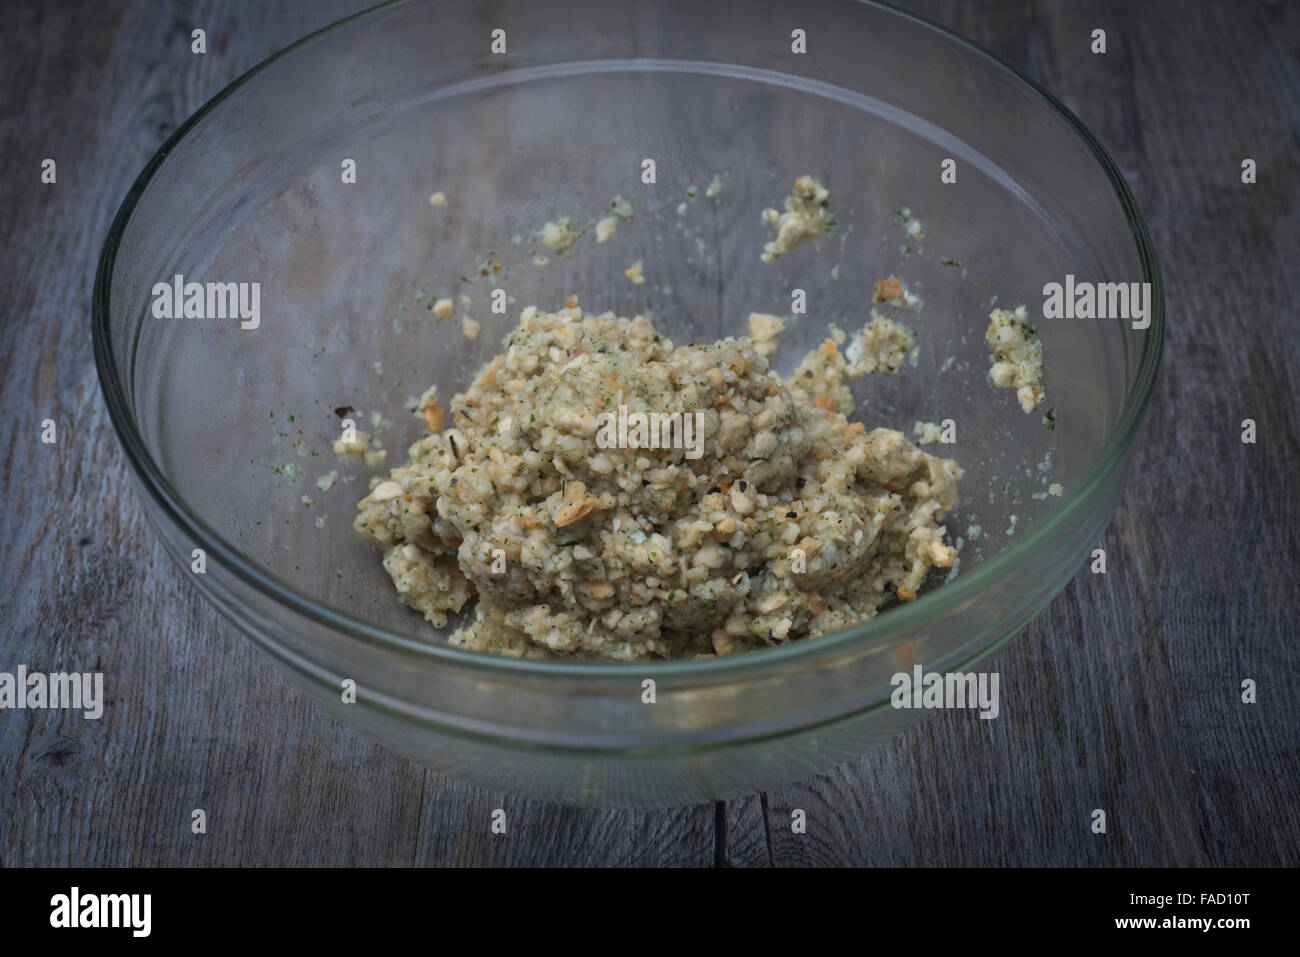 stuffing being prepared in a bowl Stock Photo